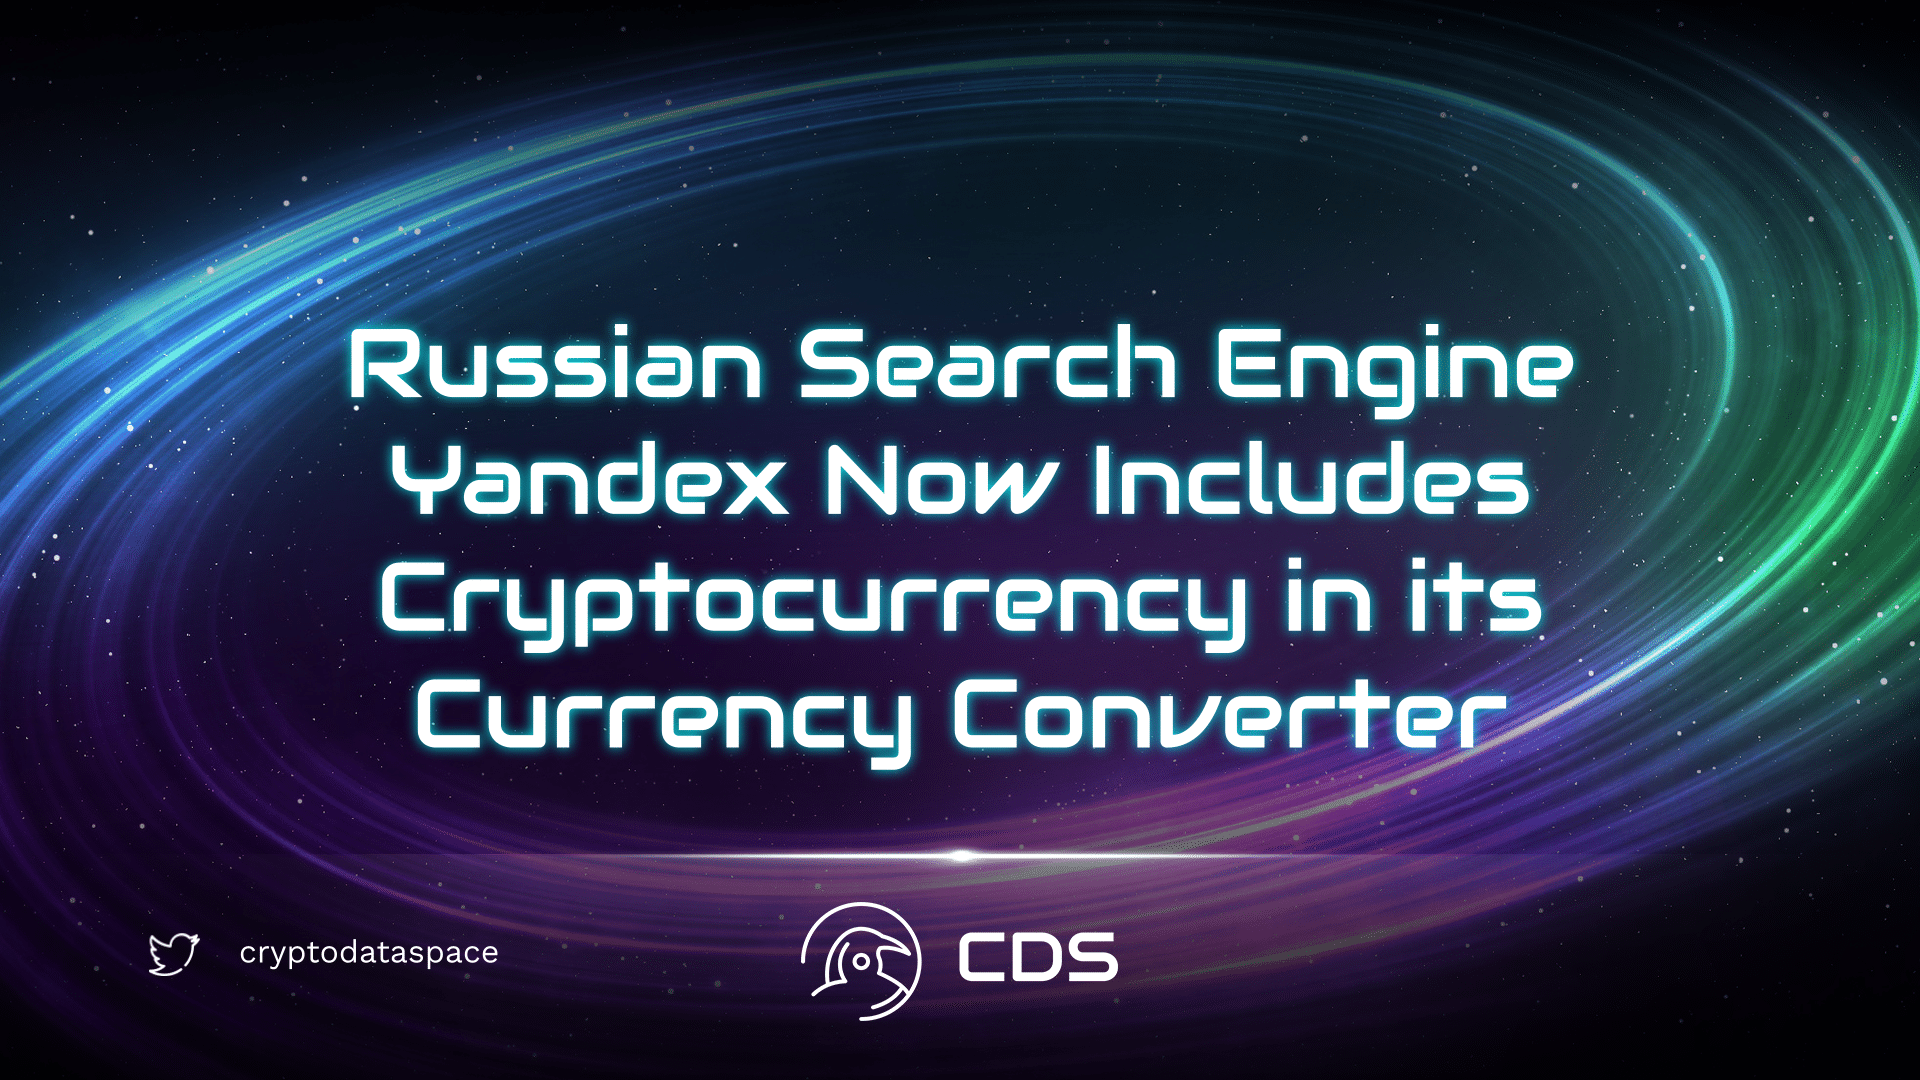 Russian Search Engine Yandex Now Includes Cryptocurrency in its Currency Converter